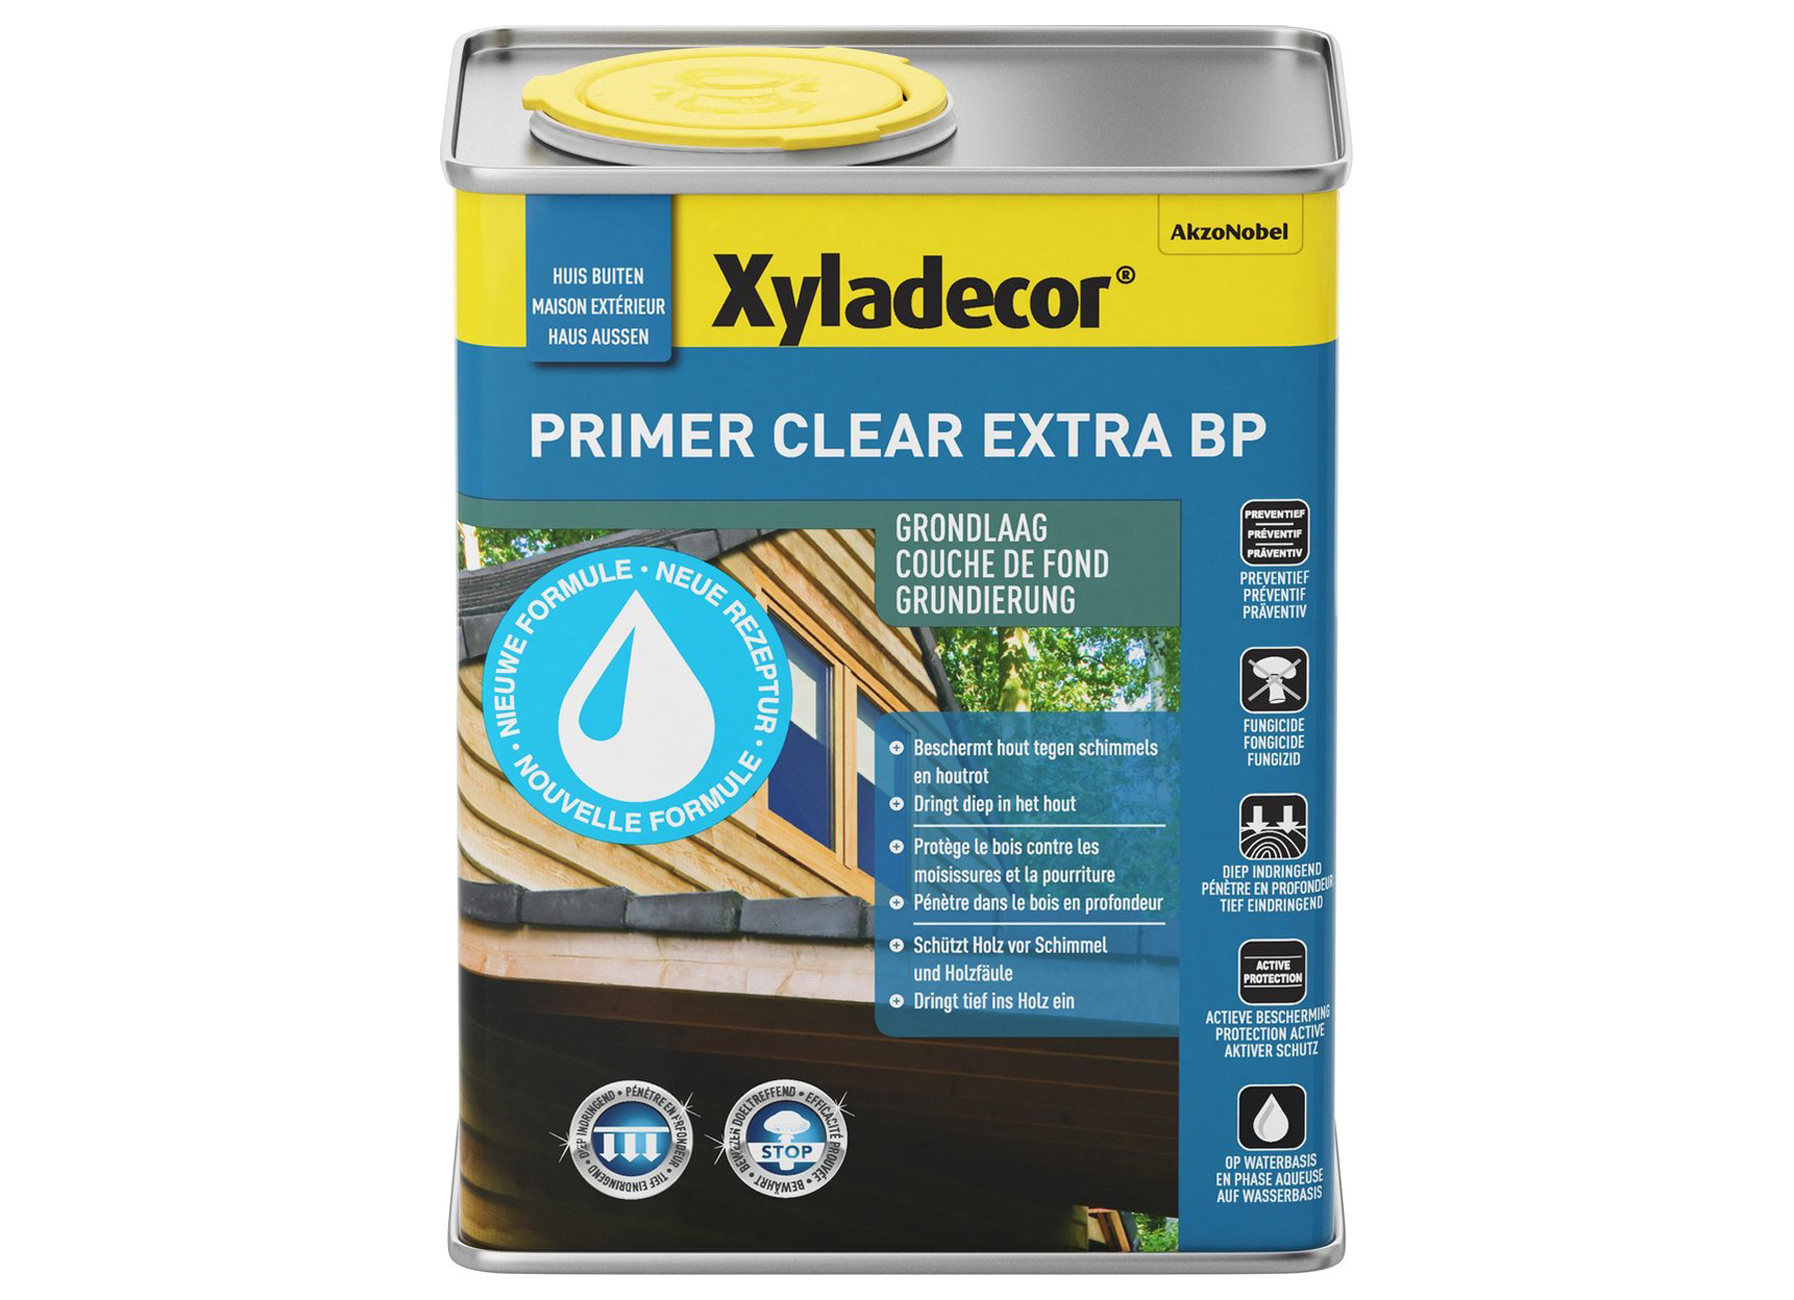 XYLADECOR PRIMER CLEAR EXTRA BP*